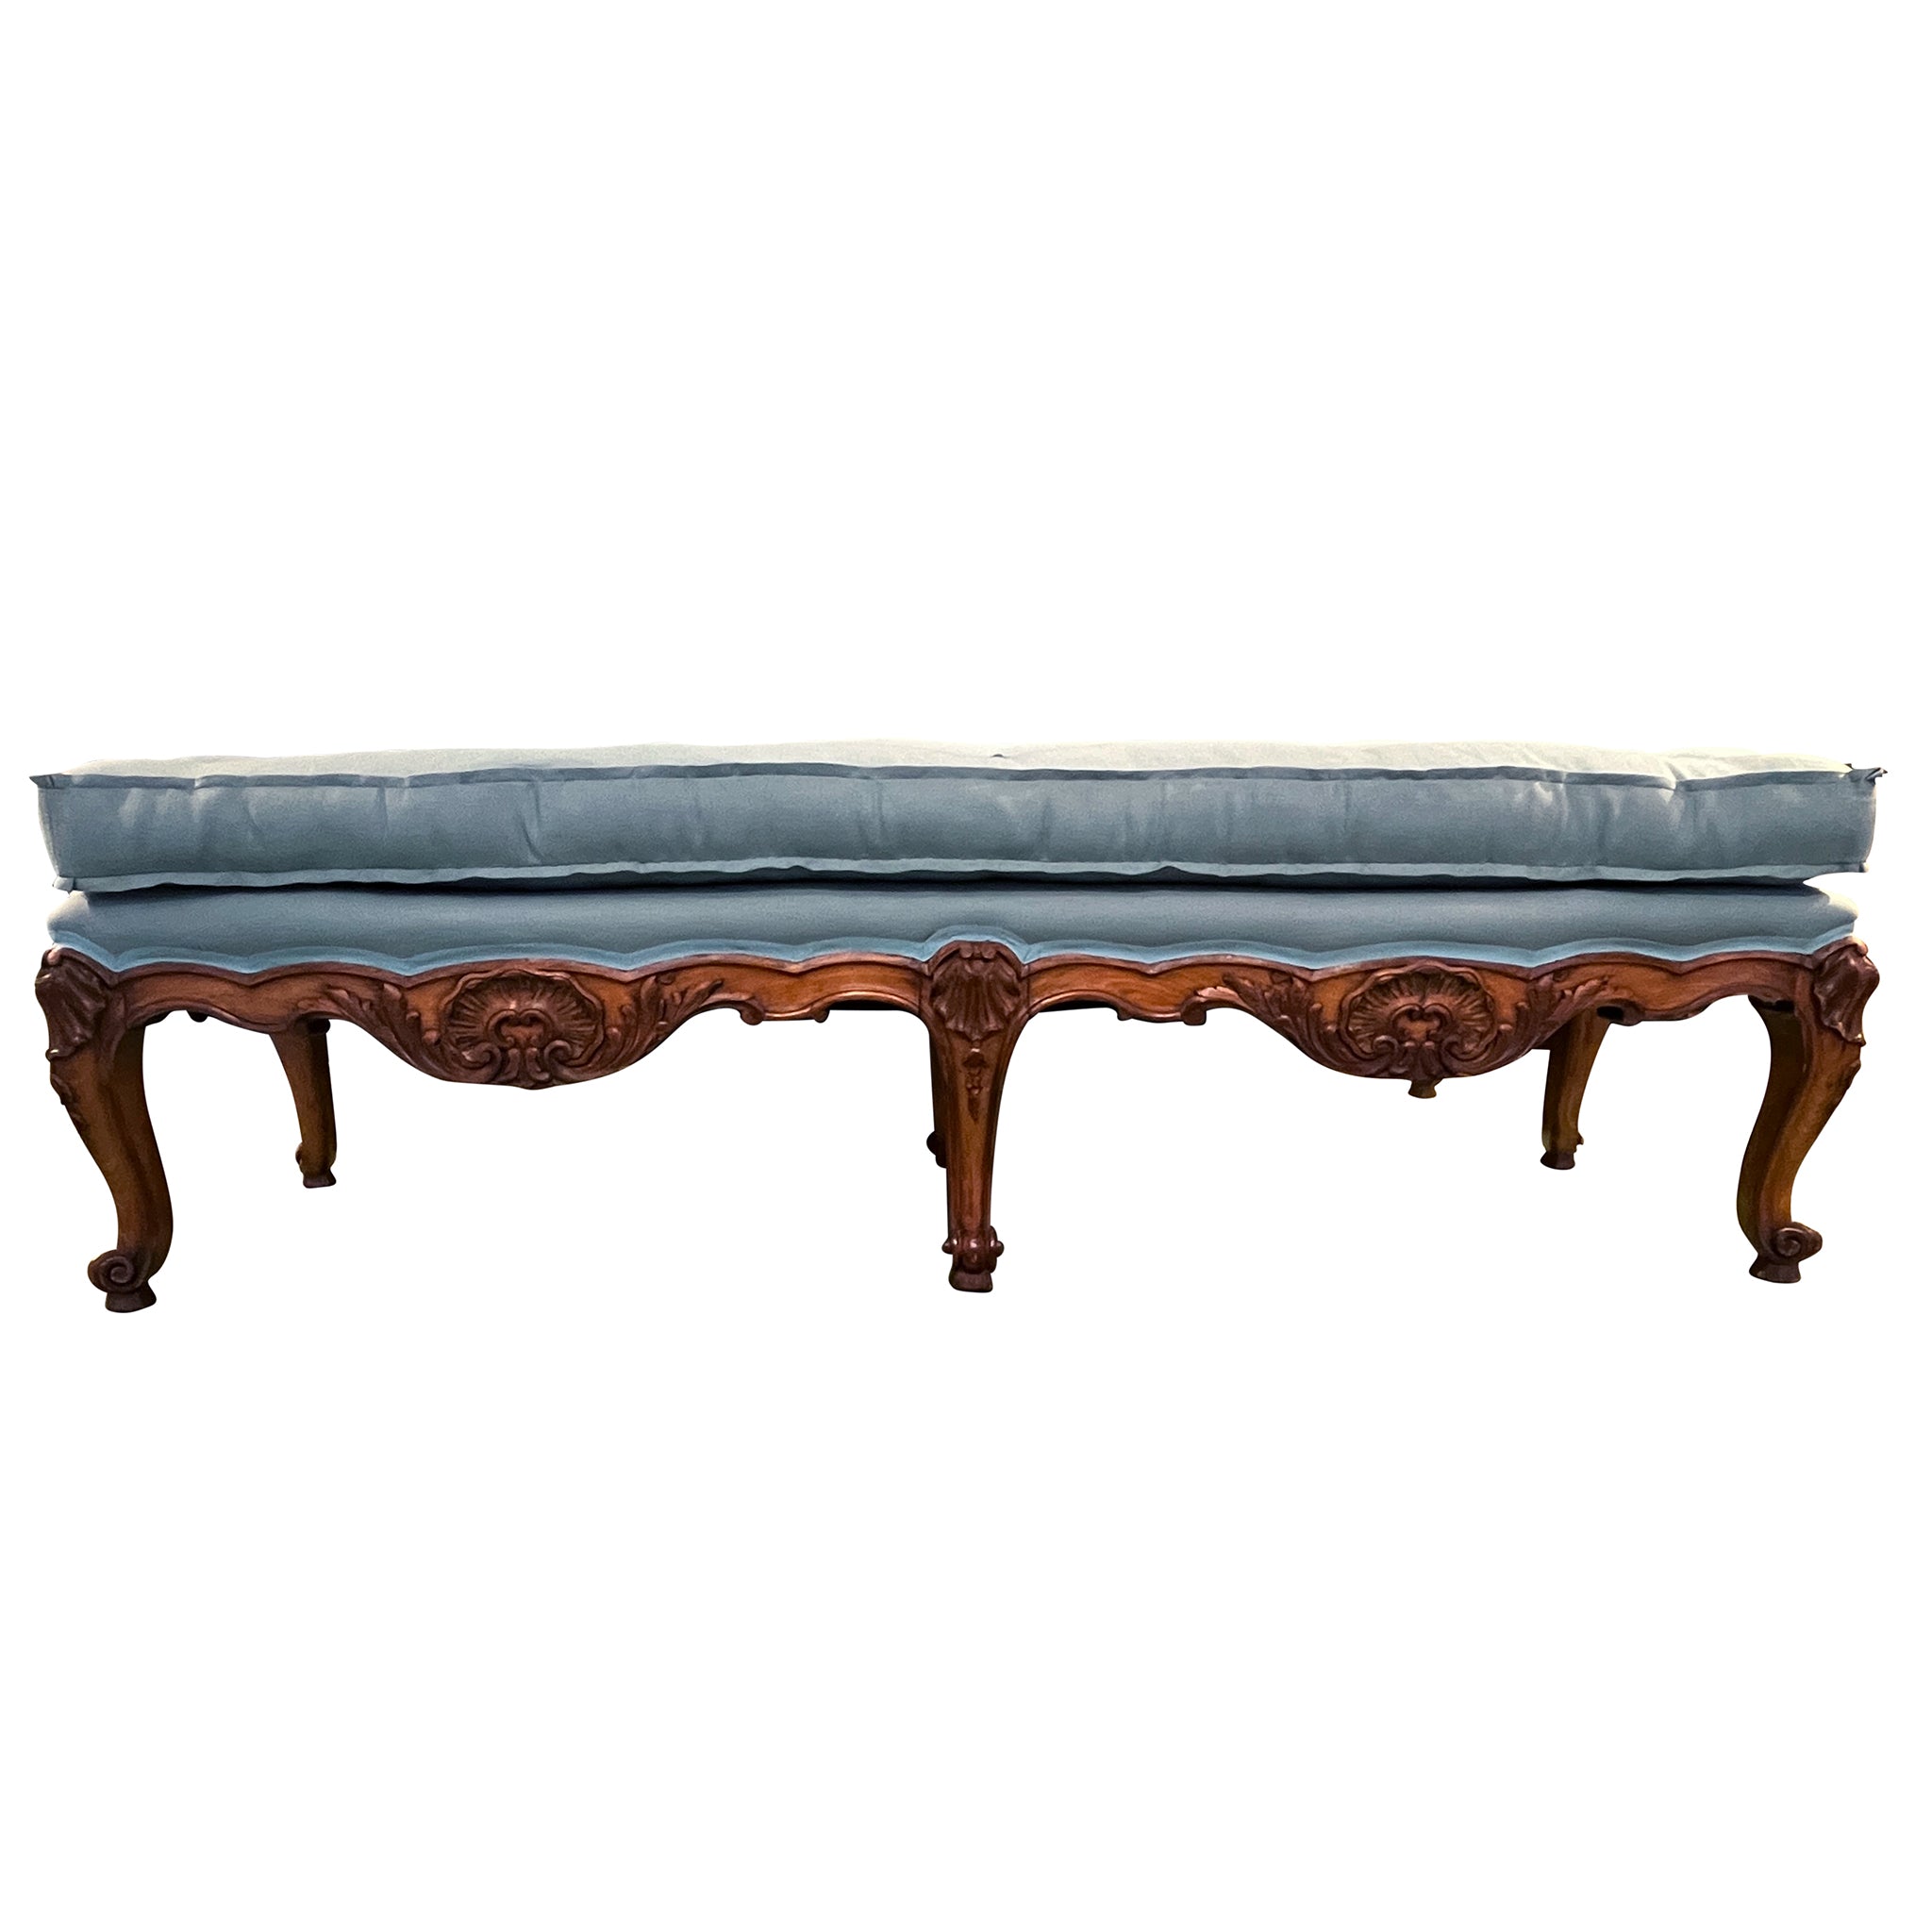 Late 19th Century Carved Walnut Long Upholstered Bench with Cabriole Legs